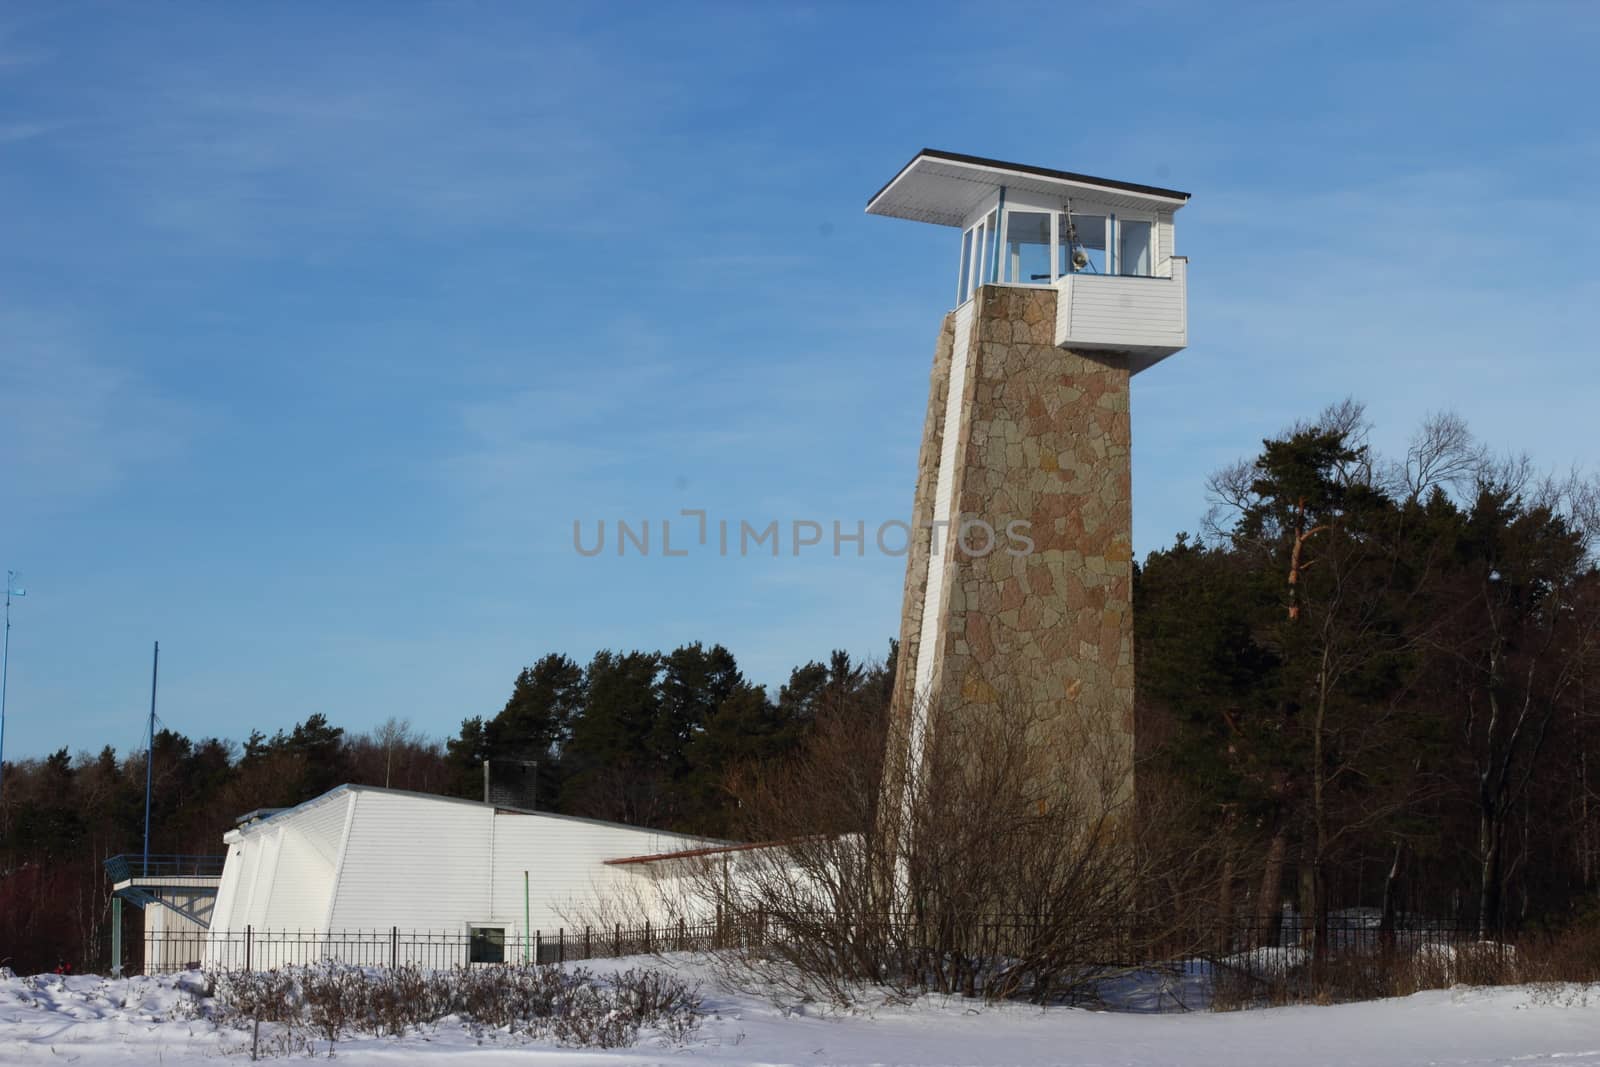 Rescue station with a tower on a winter beach